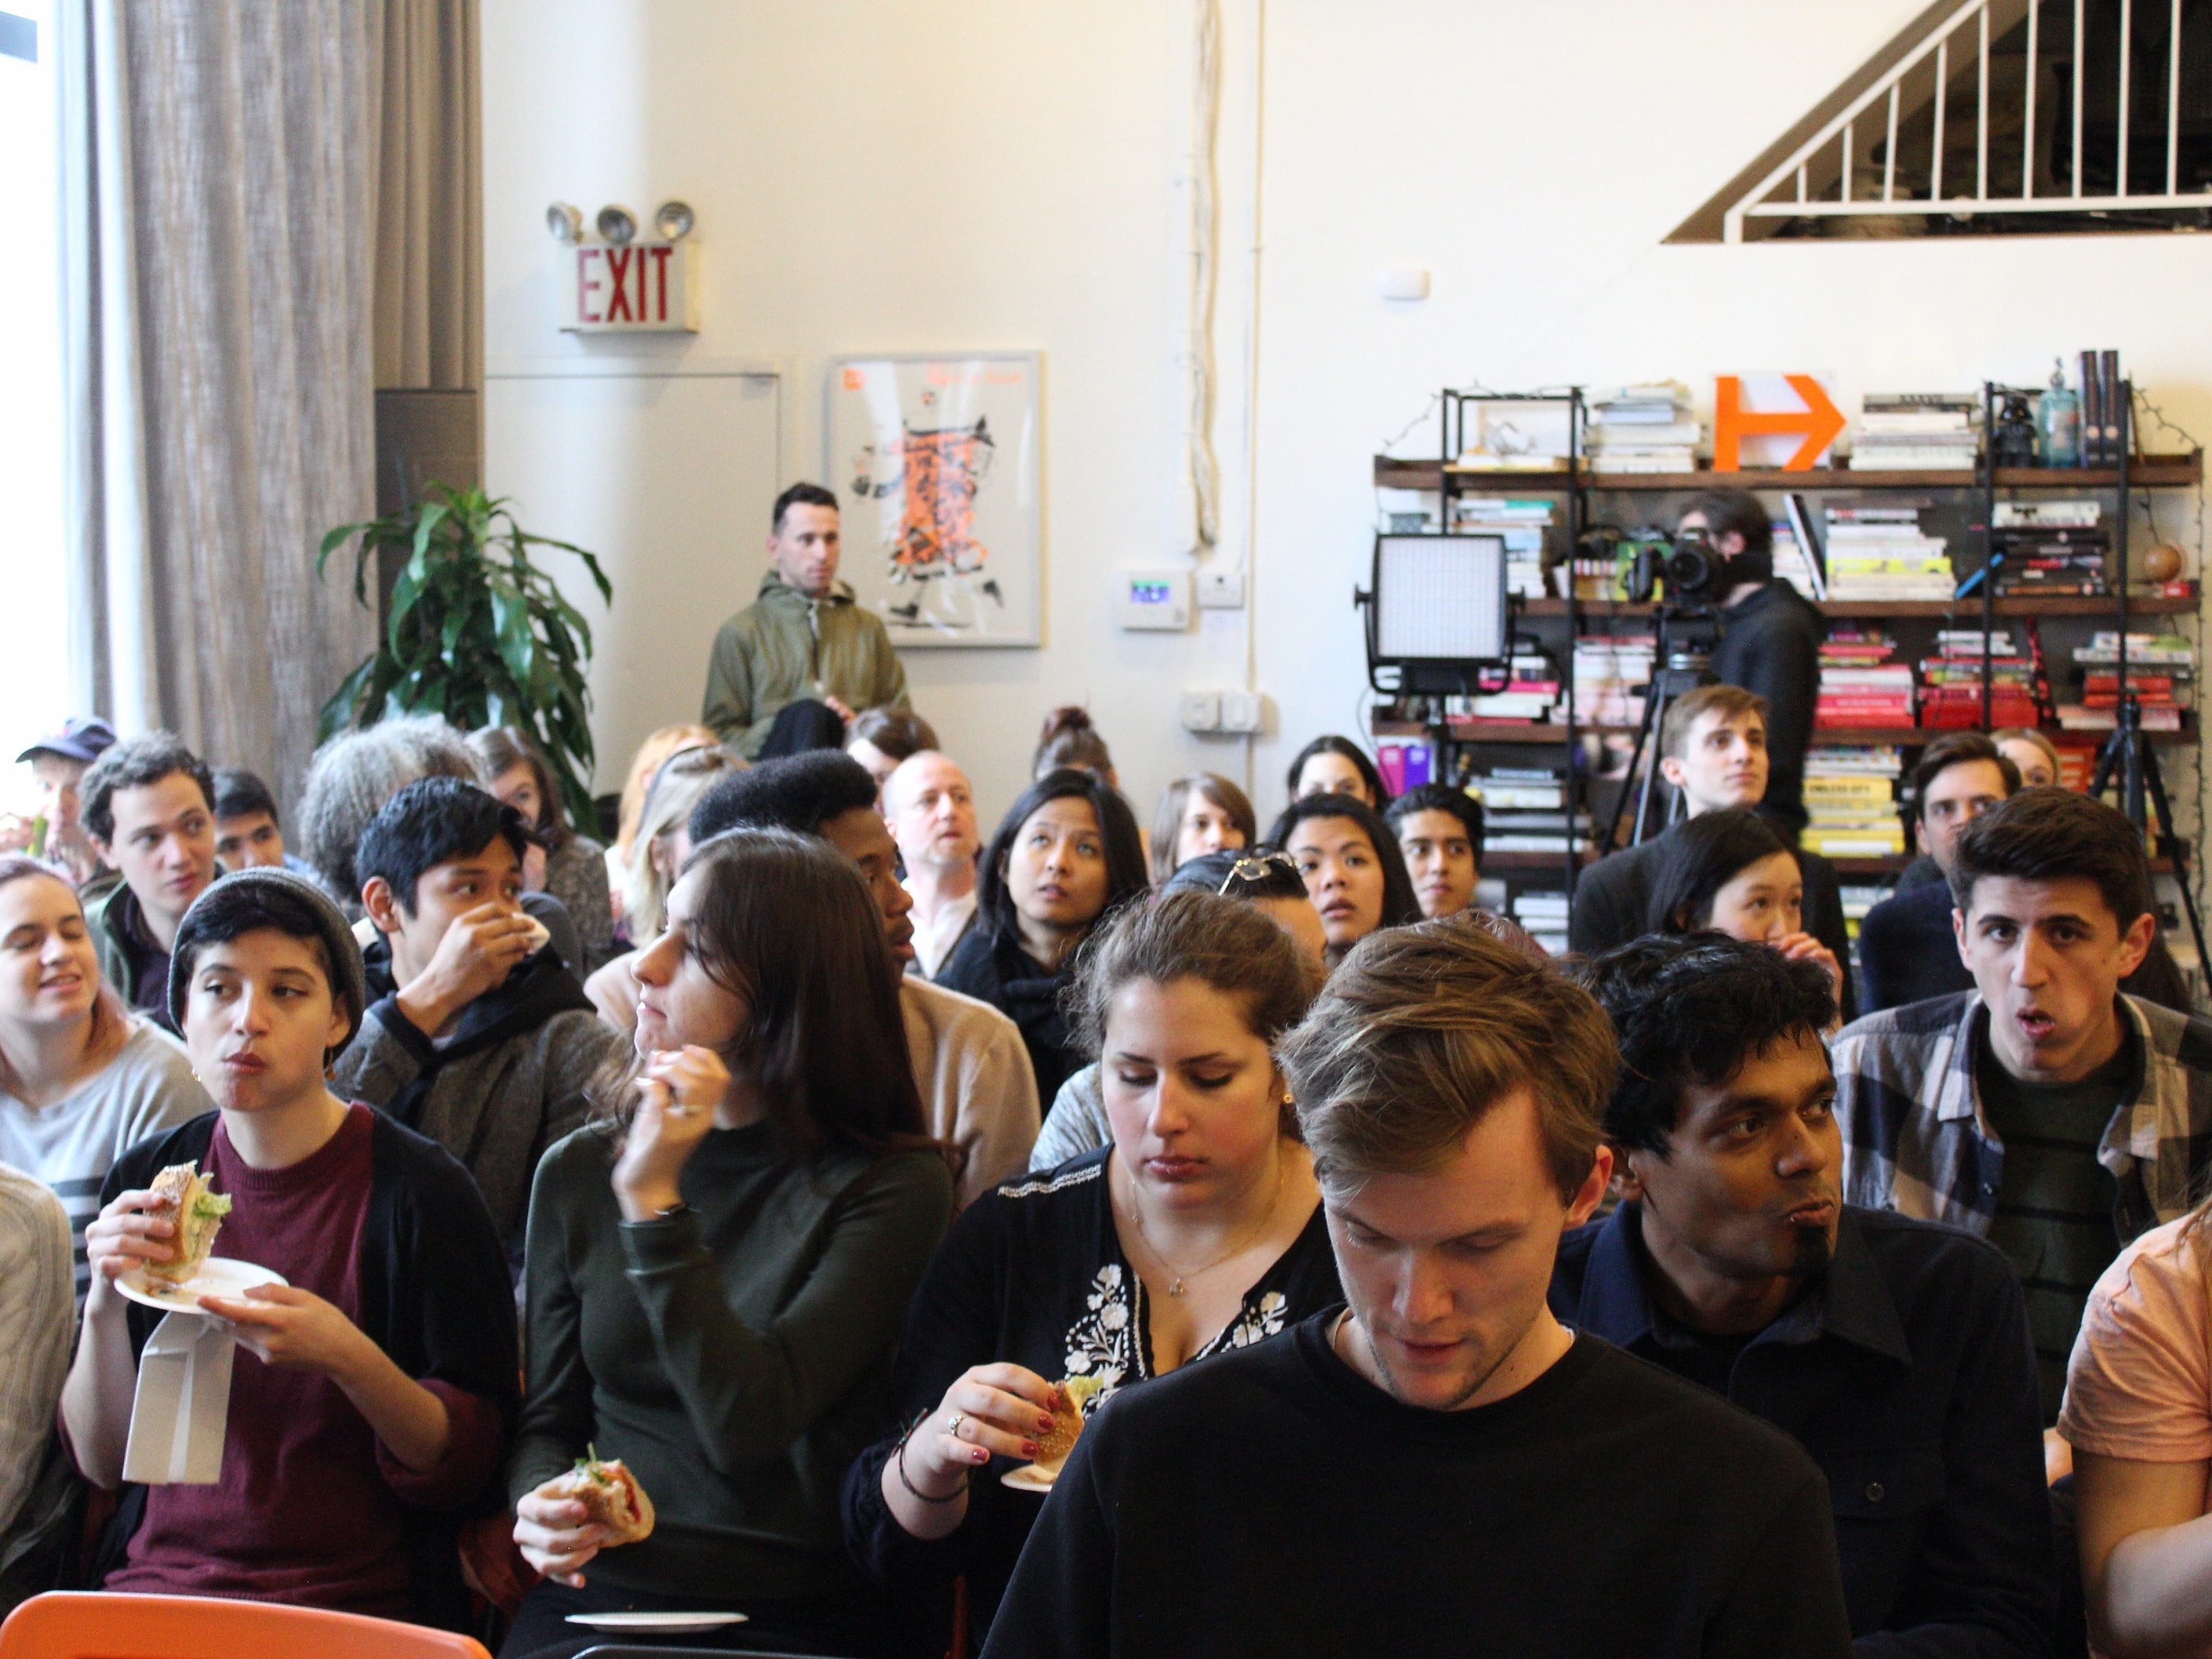 A diverse group of people sit closely together in a room, attentively listening to something off-camera. Some hold food and drinks, possibly indicating a casual or social event. In the background, there are shelves of books and a staircase.